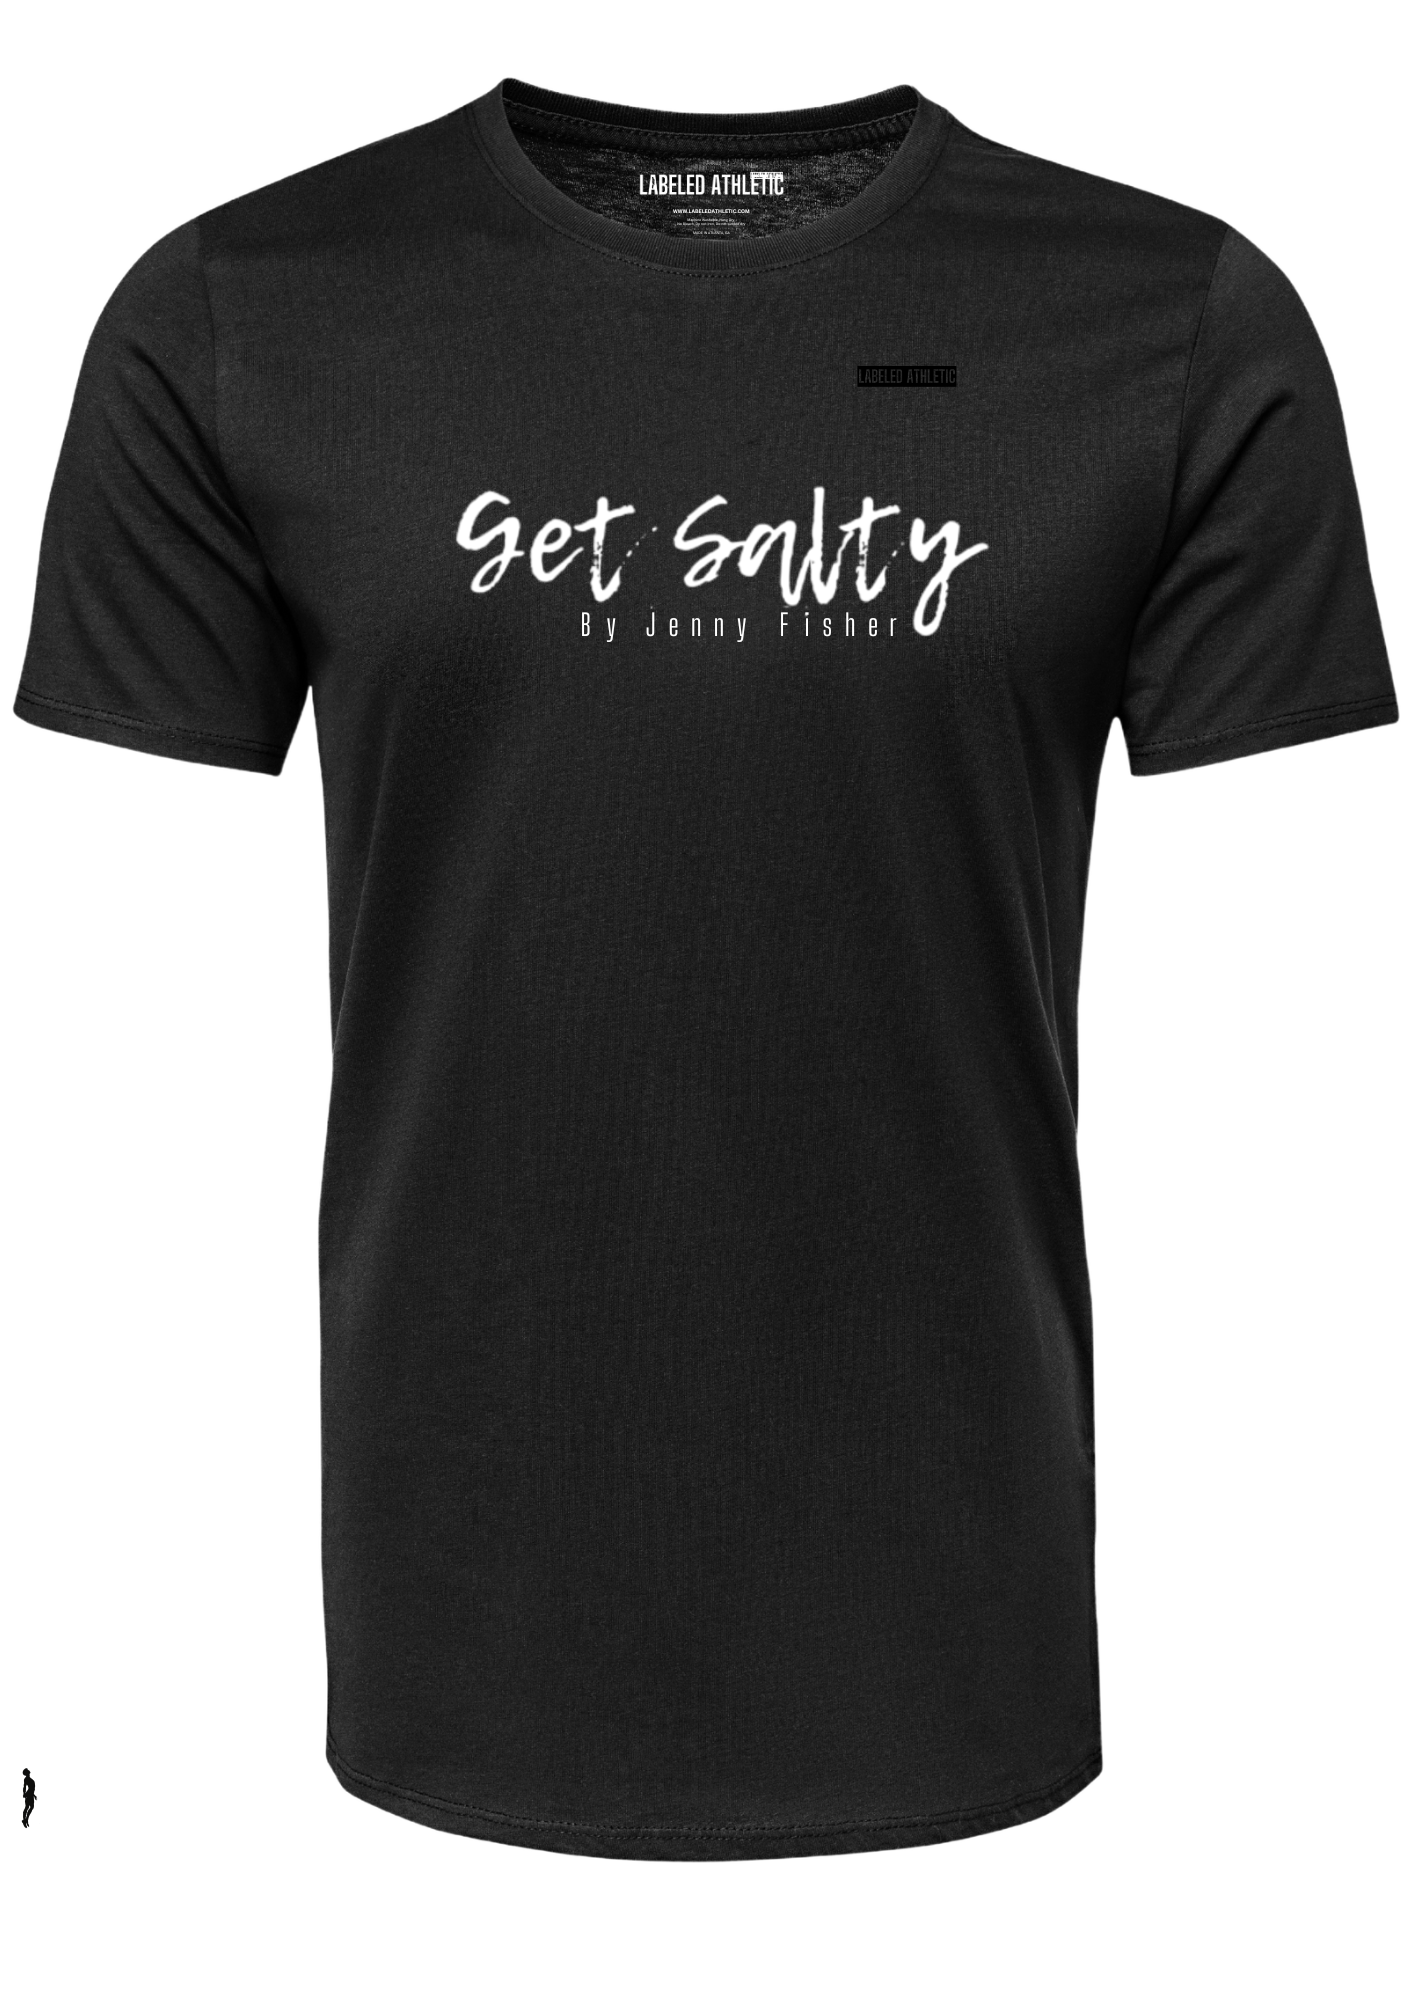 GET SALTY by Jenny Fisher - LABELED ATHLETIC T-SHIRT | BLACK/WHITE/BLACK